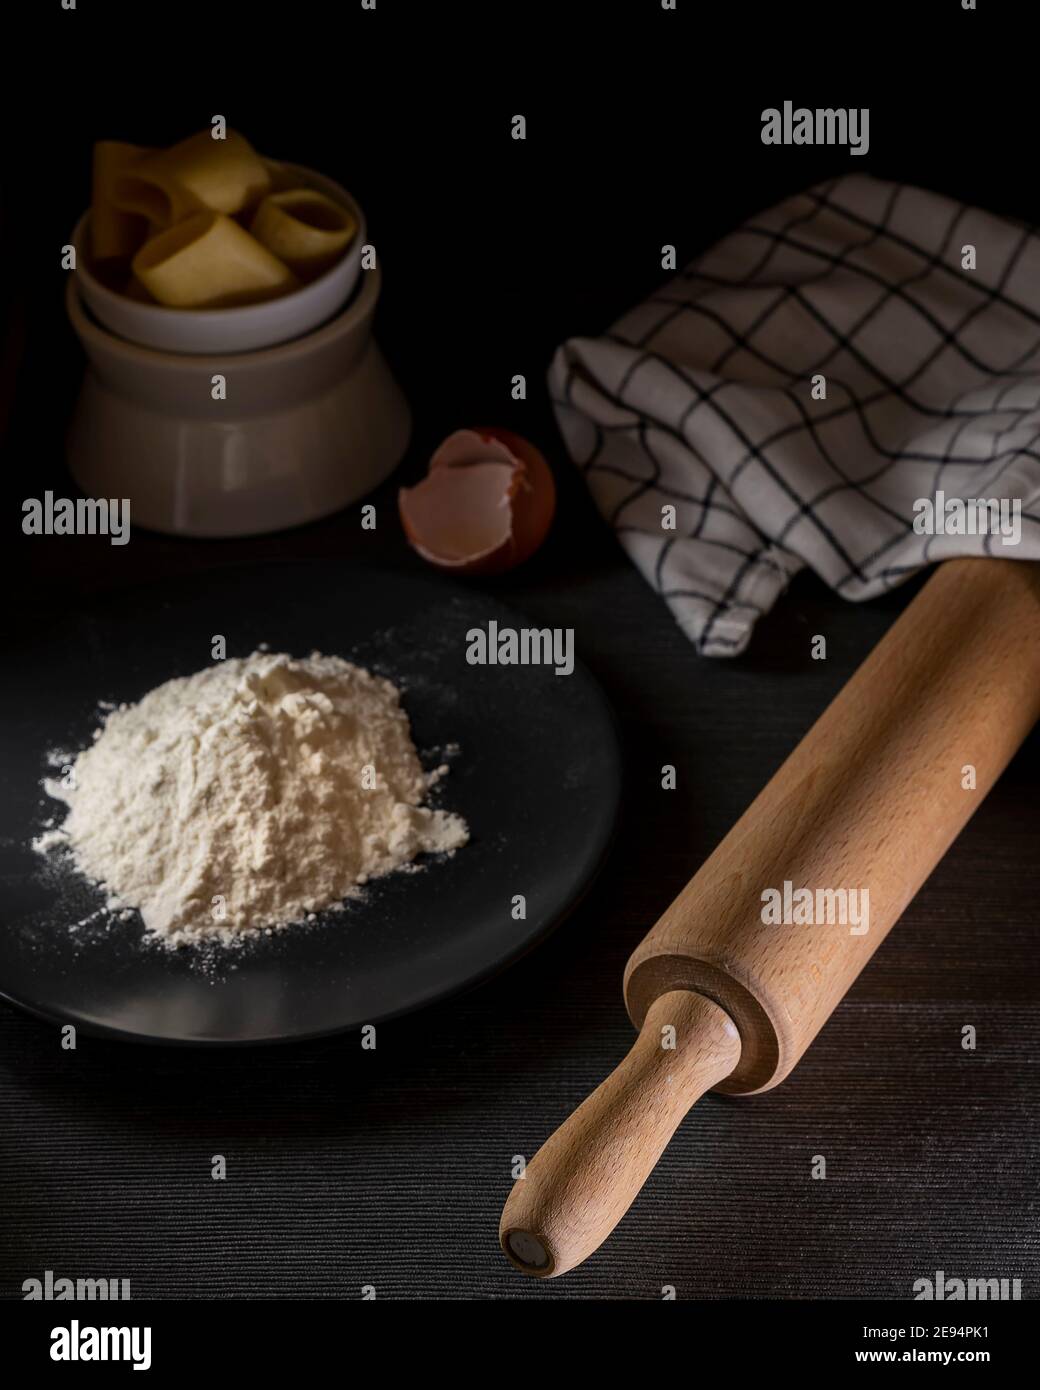 Dark composition of elements for the preparation of homemade pasta such as flour, eggs, wooden rolling pin and various accessories Stock Photo